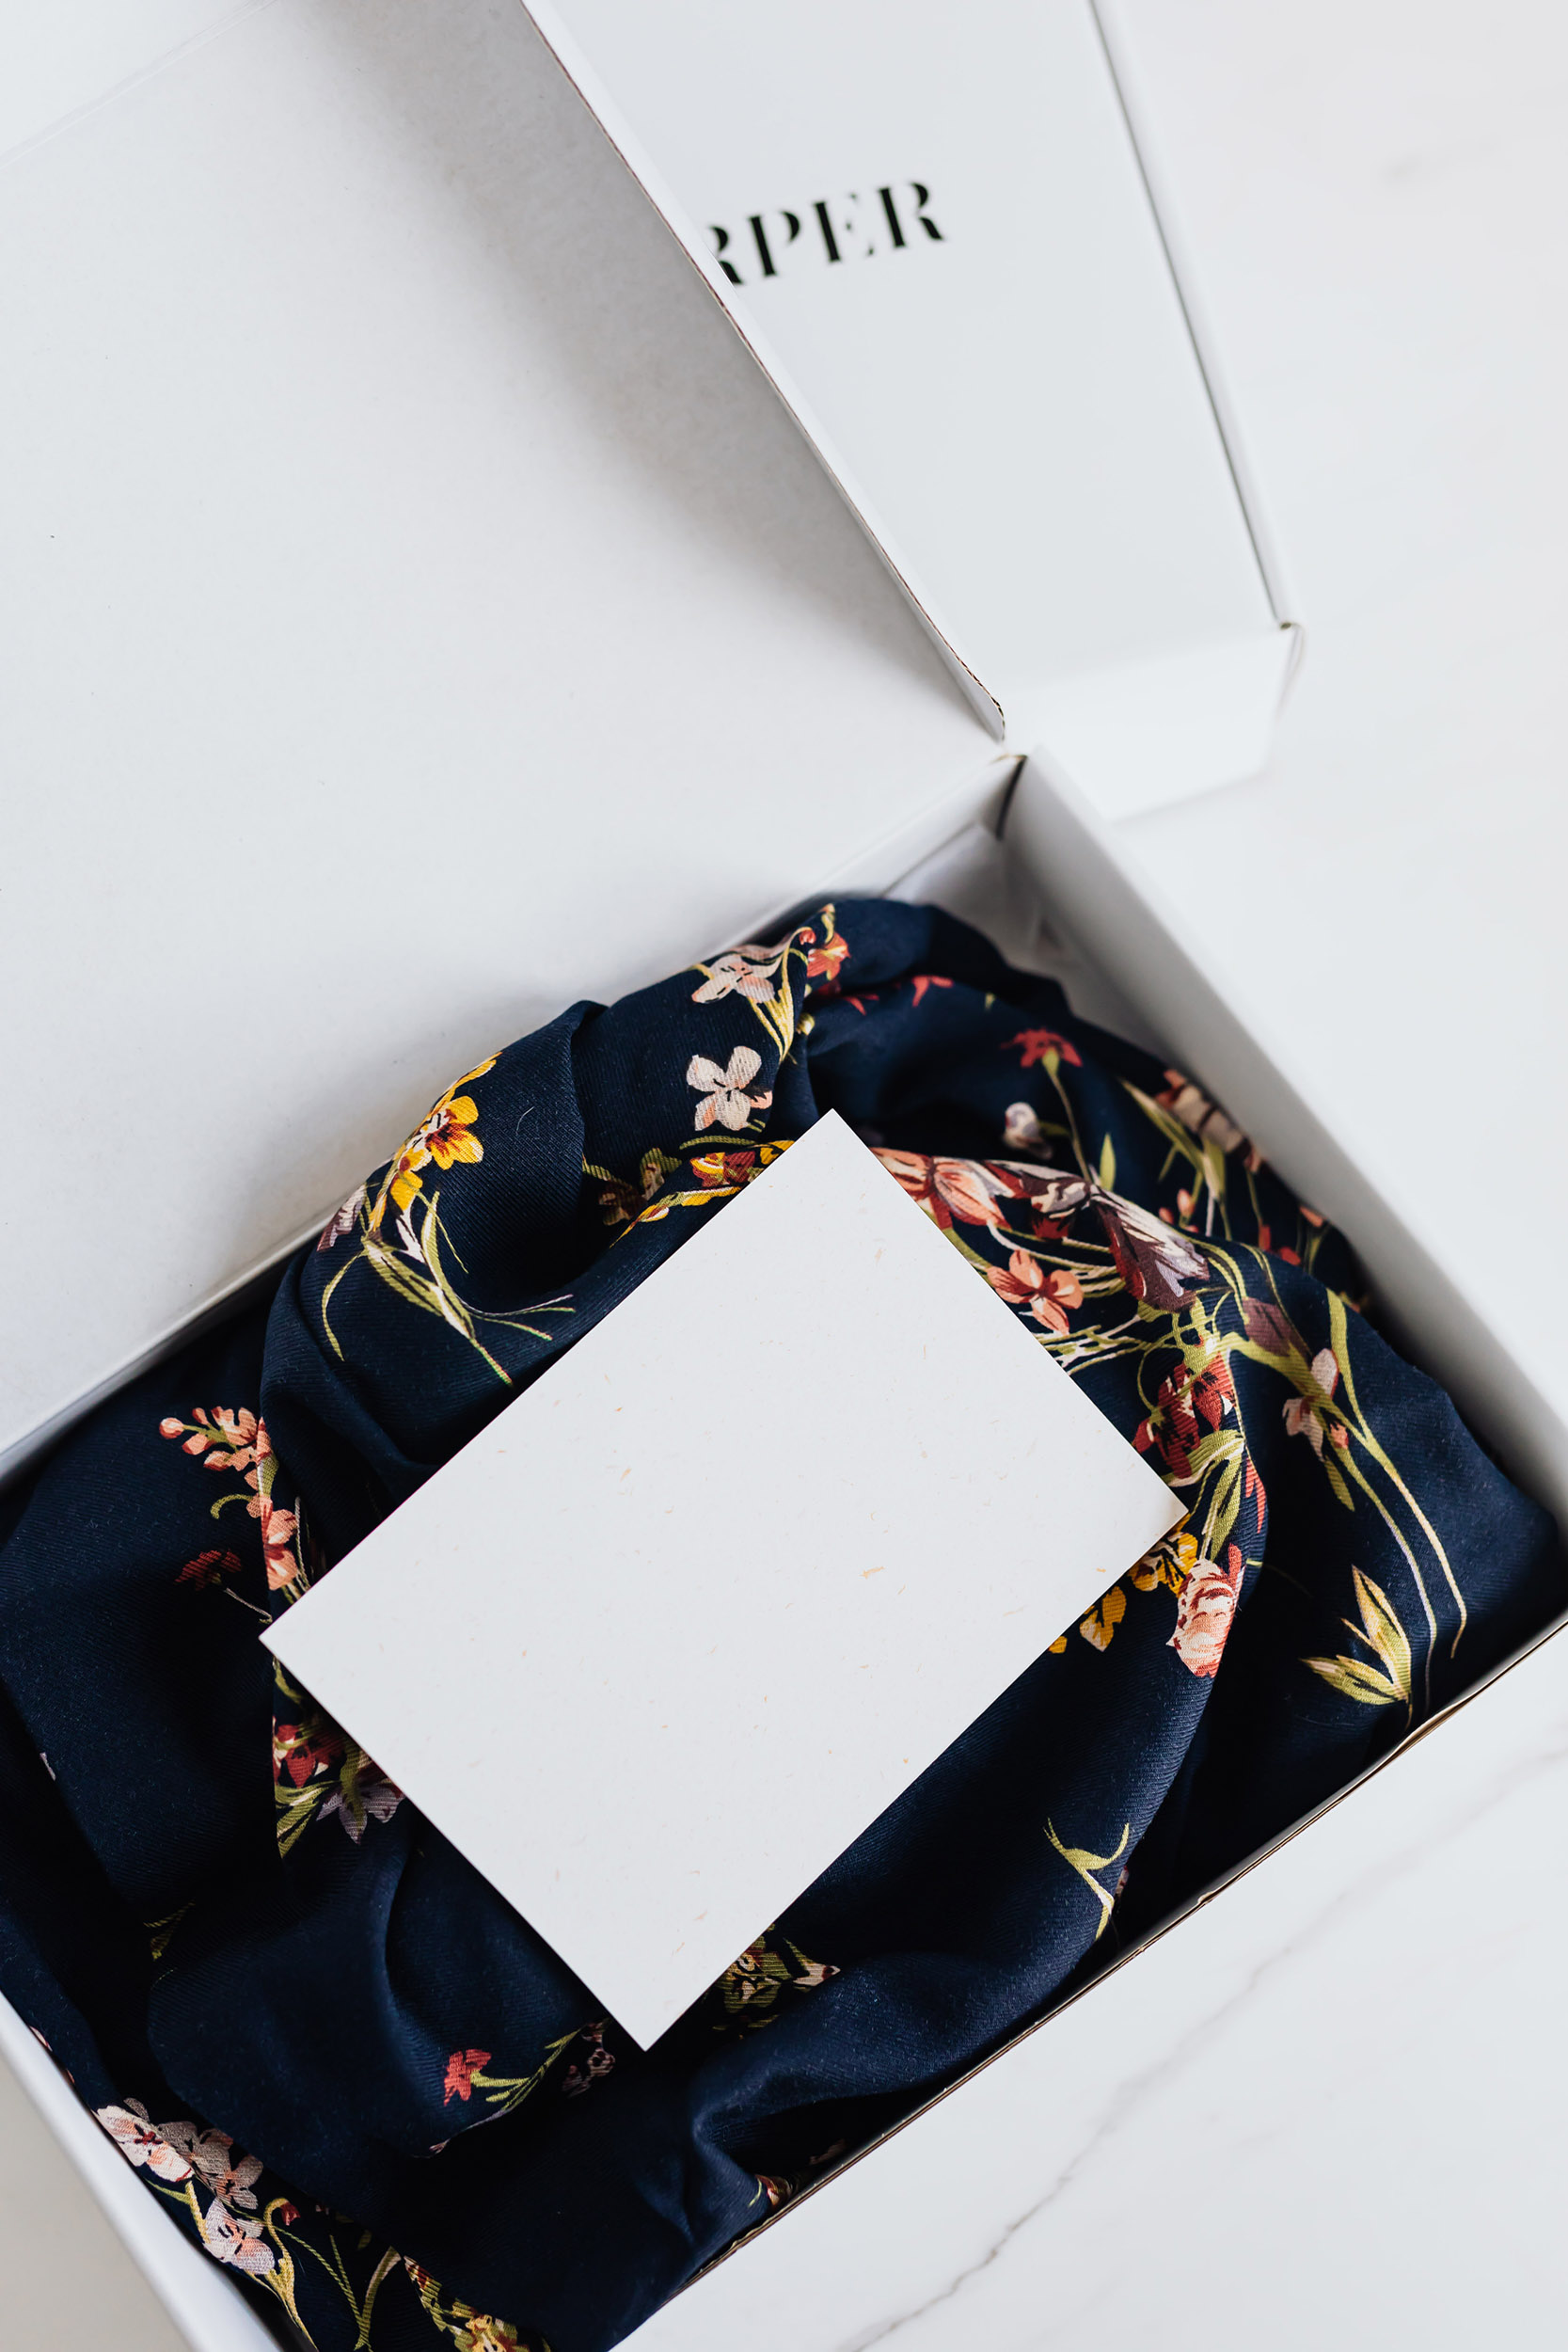 5 Ways to Elevate The Unboxing Experience for Customers